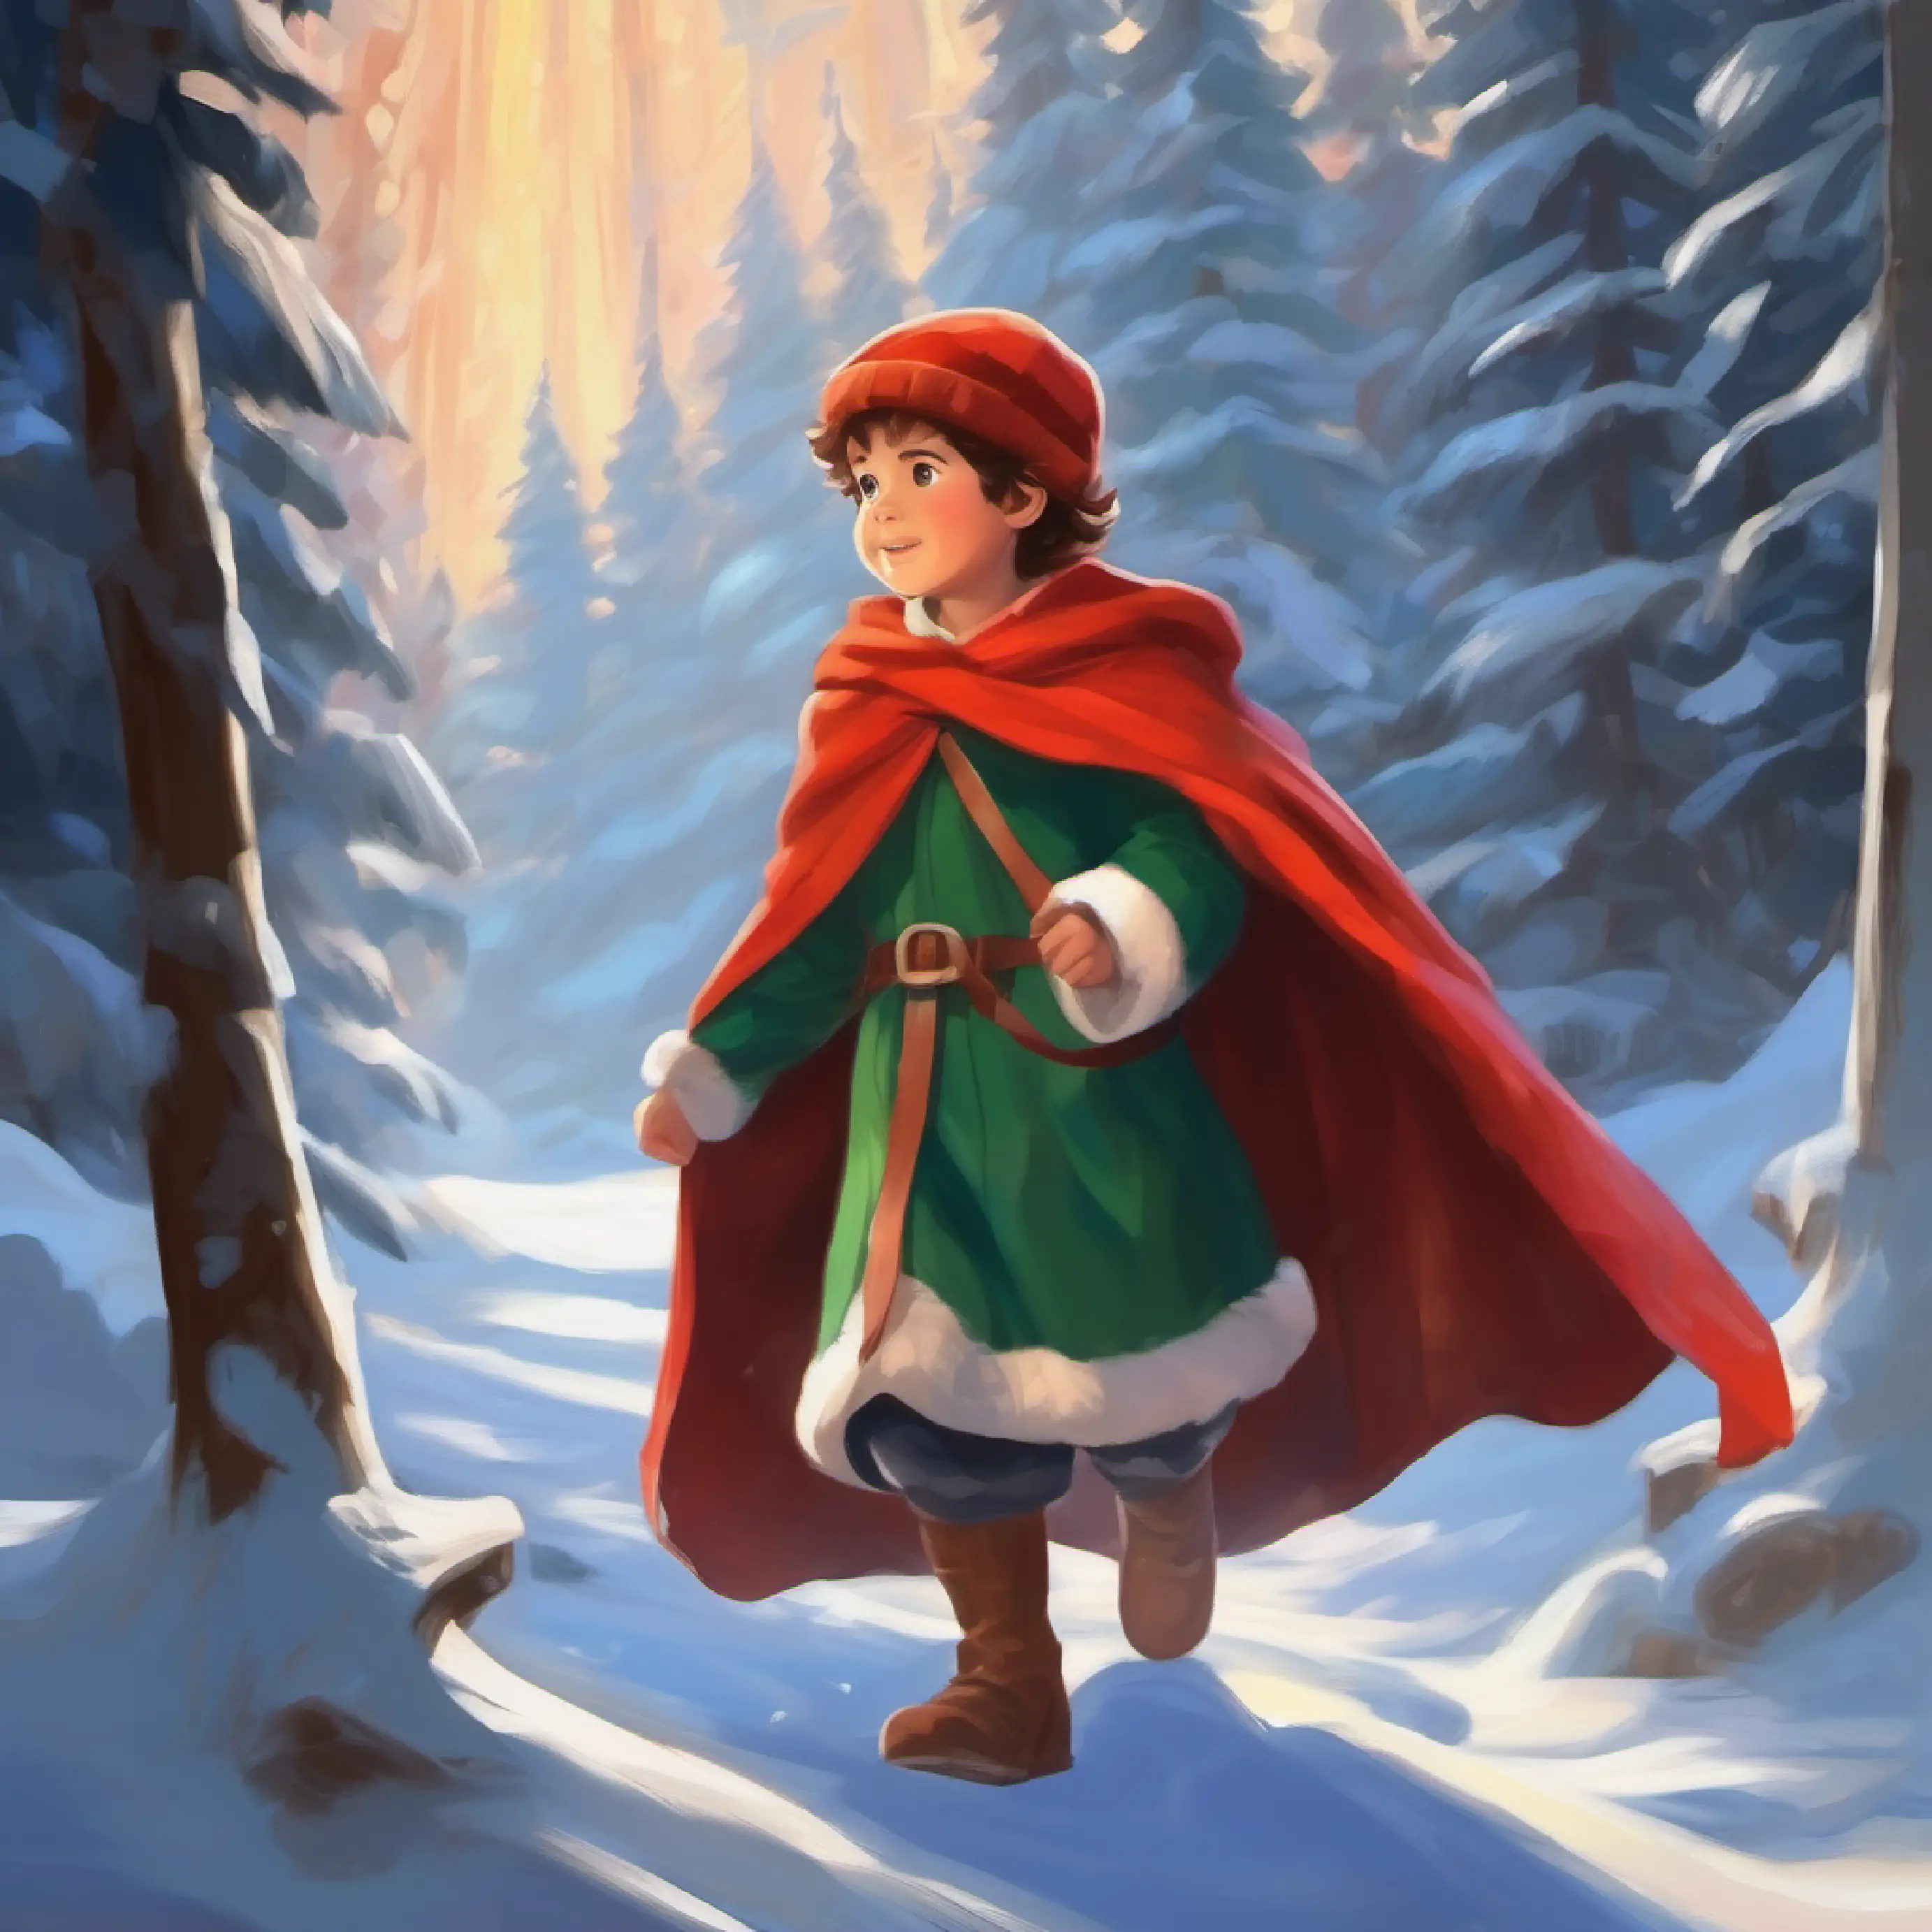 Brave child approaches, ready to receive the mythical cloak